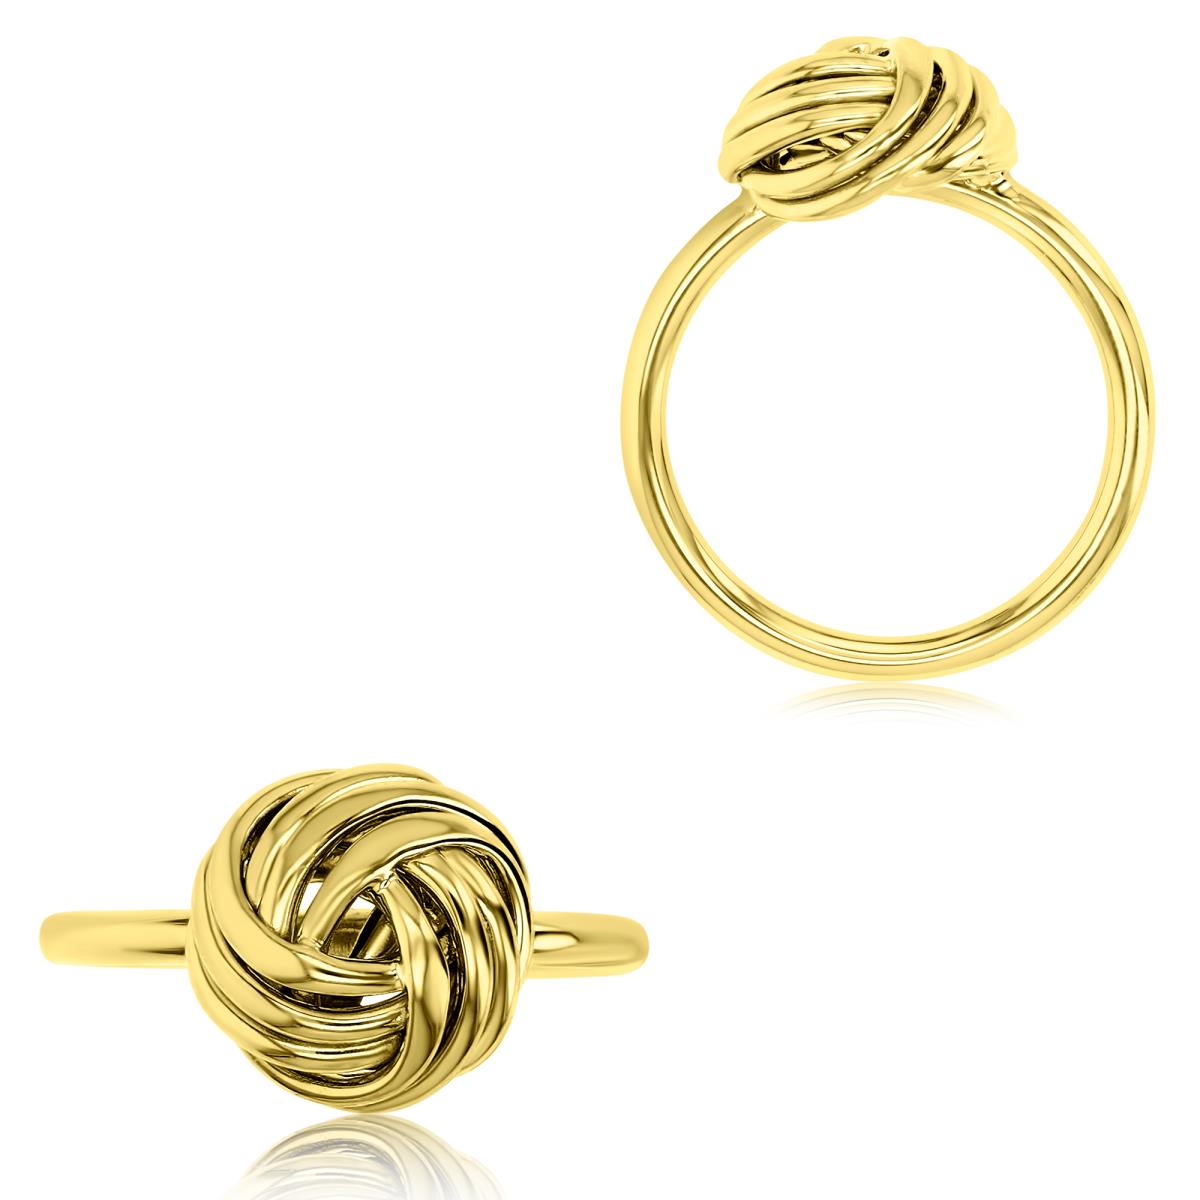 10K Yellow Gold 11mm Polished Love Knot Ring